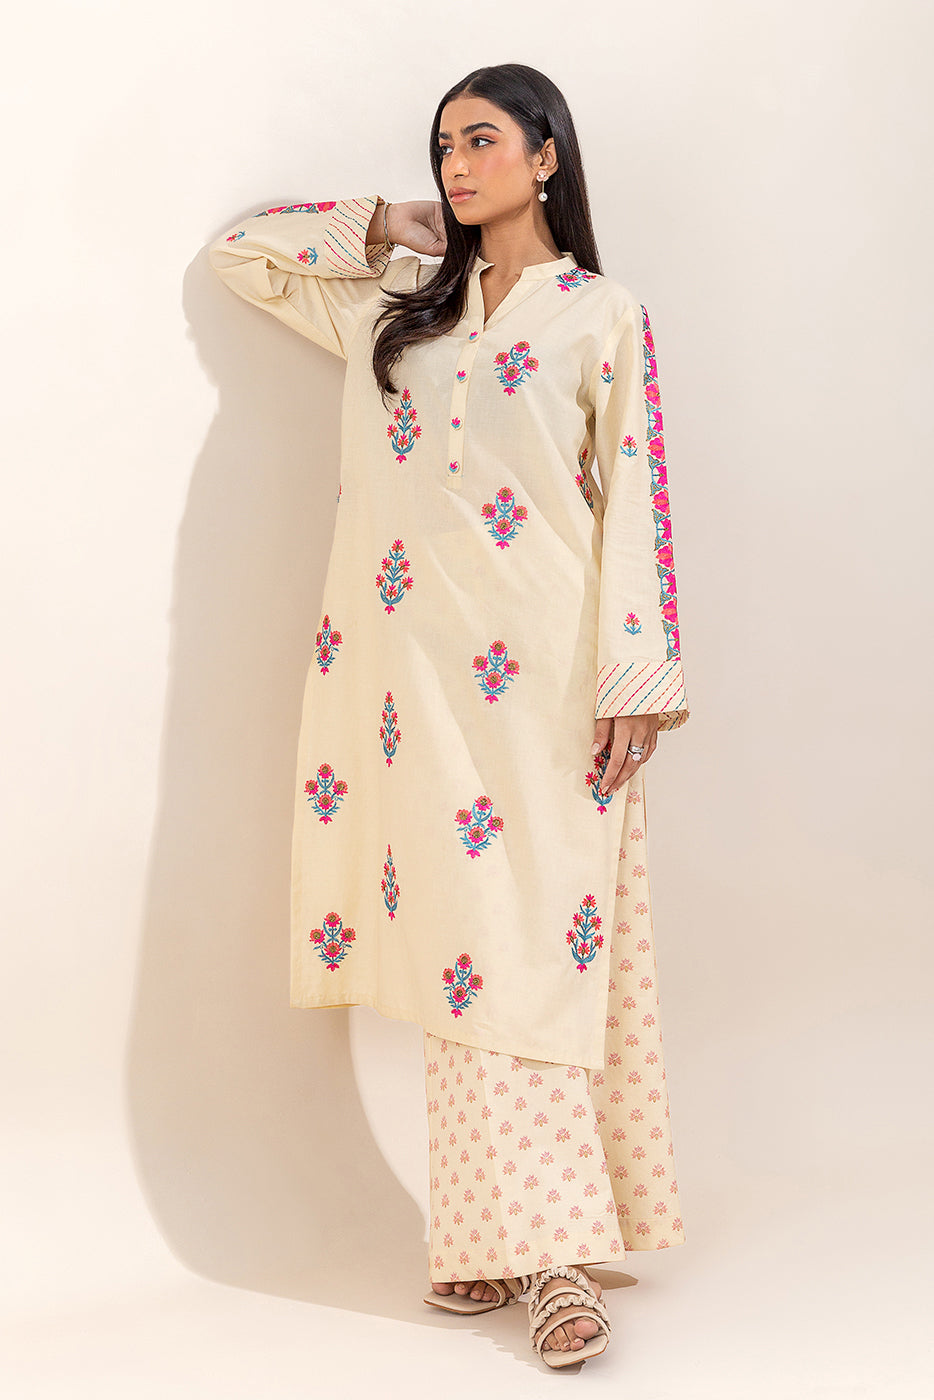 2 PIECE EMBROIDERED LAWN SUIT-FRENCH VANILLA (UNSTITCHED) - BEECHTREE